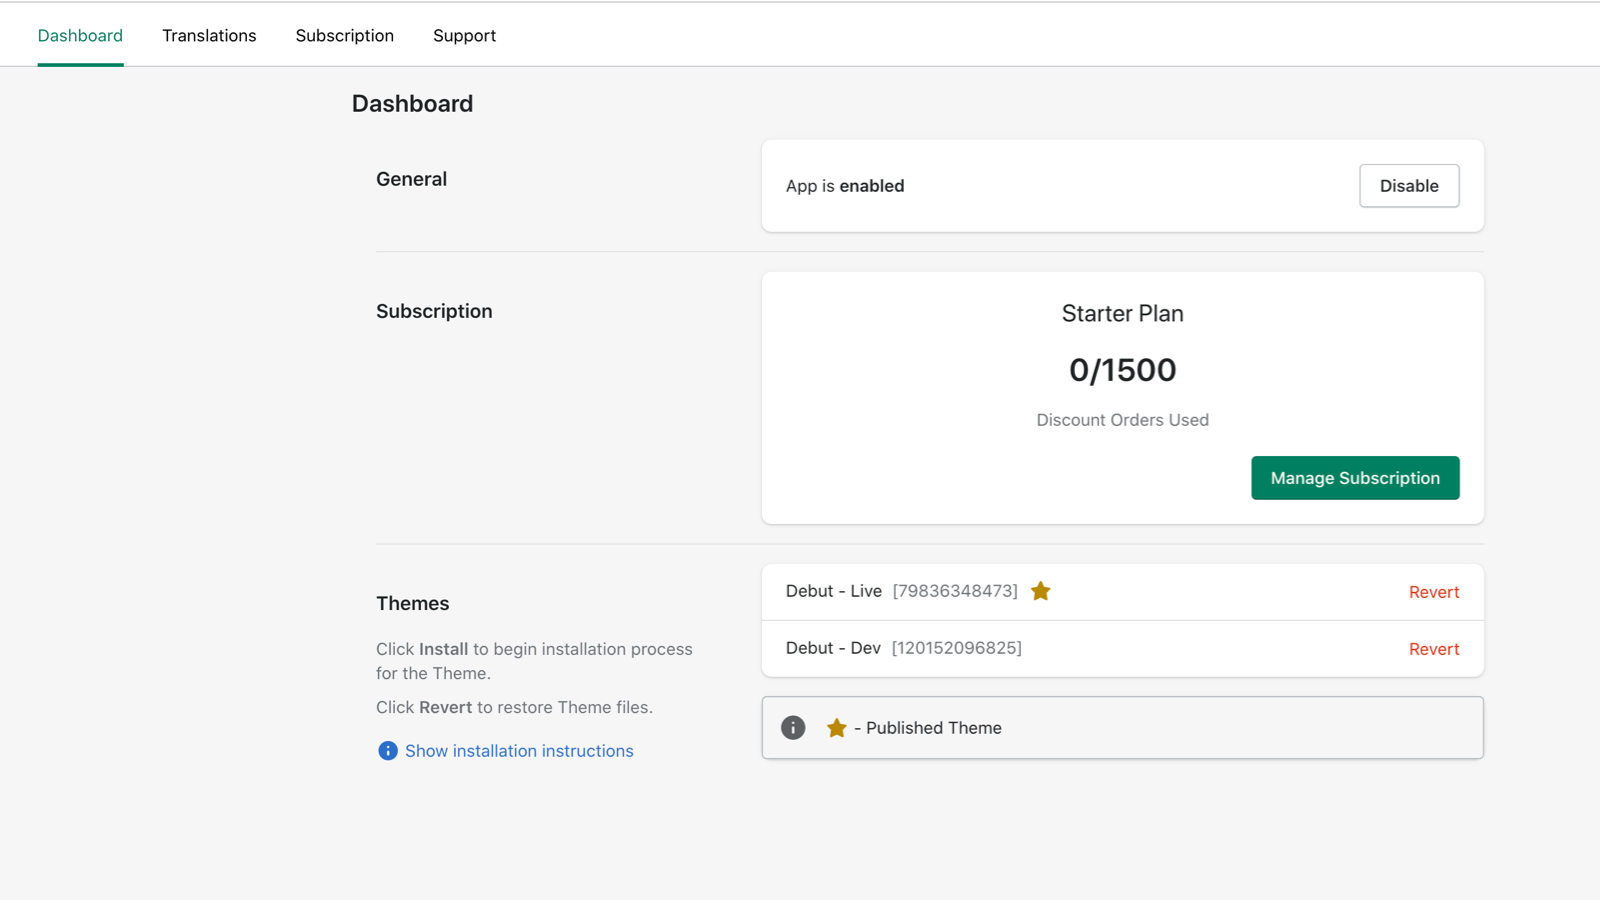 Simple dashboard for installation, subscription and enable 